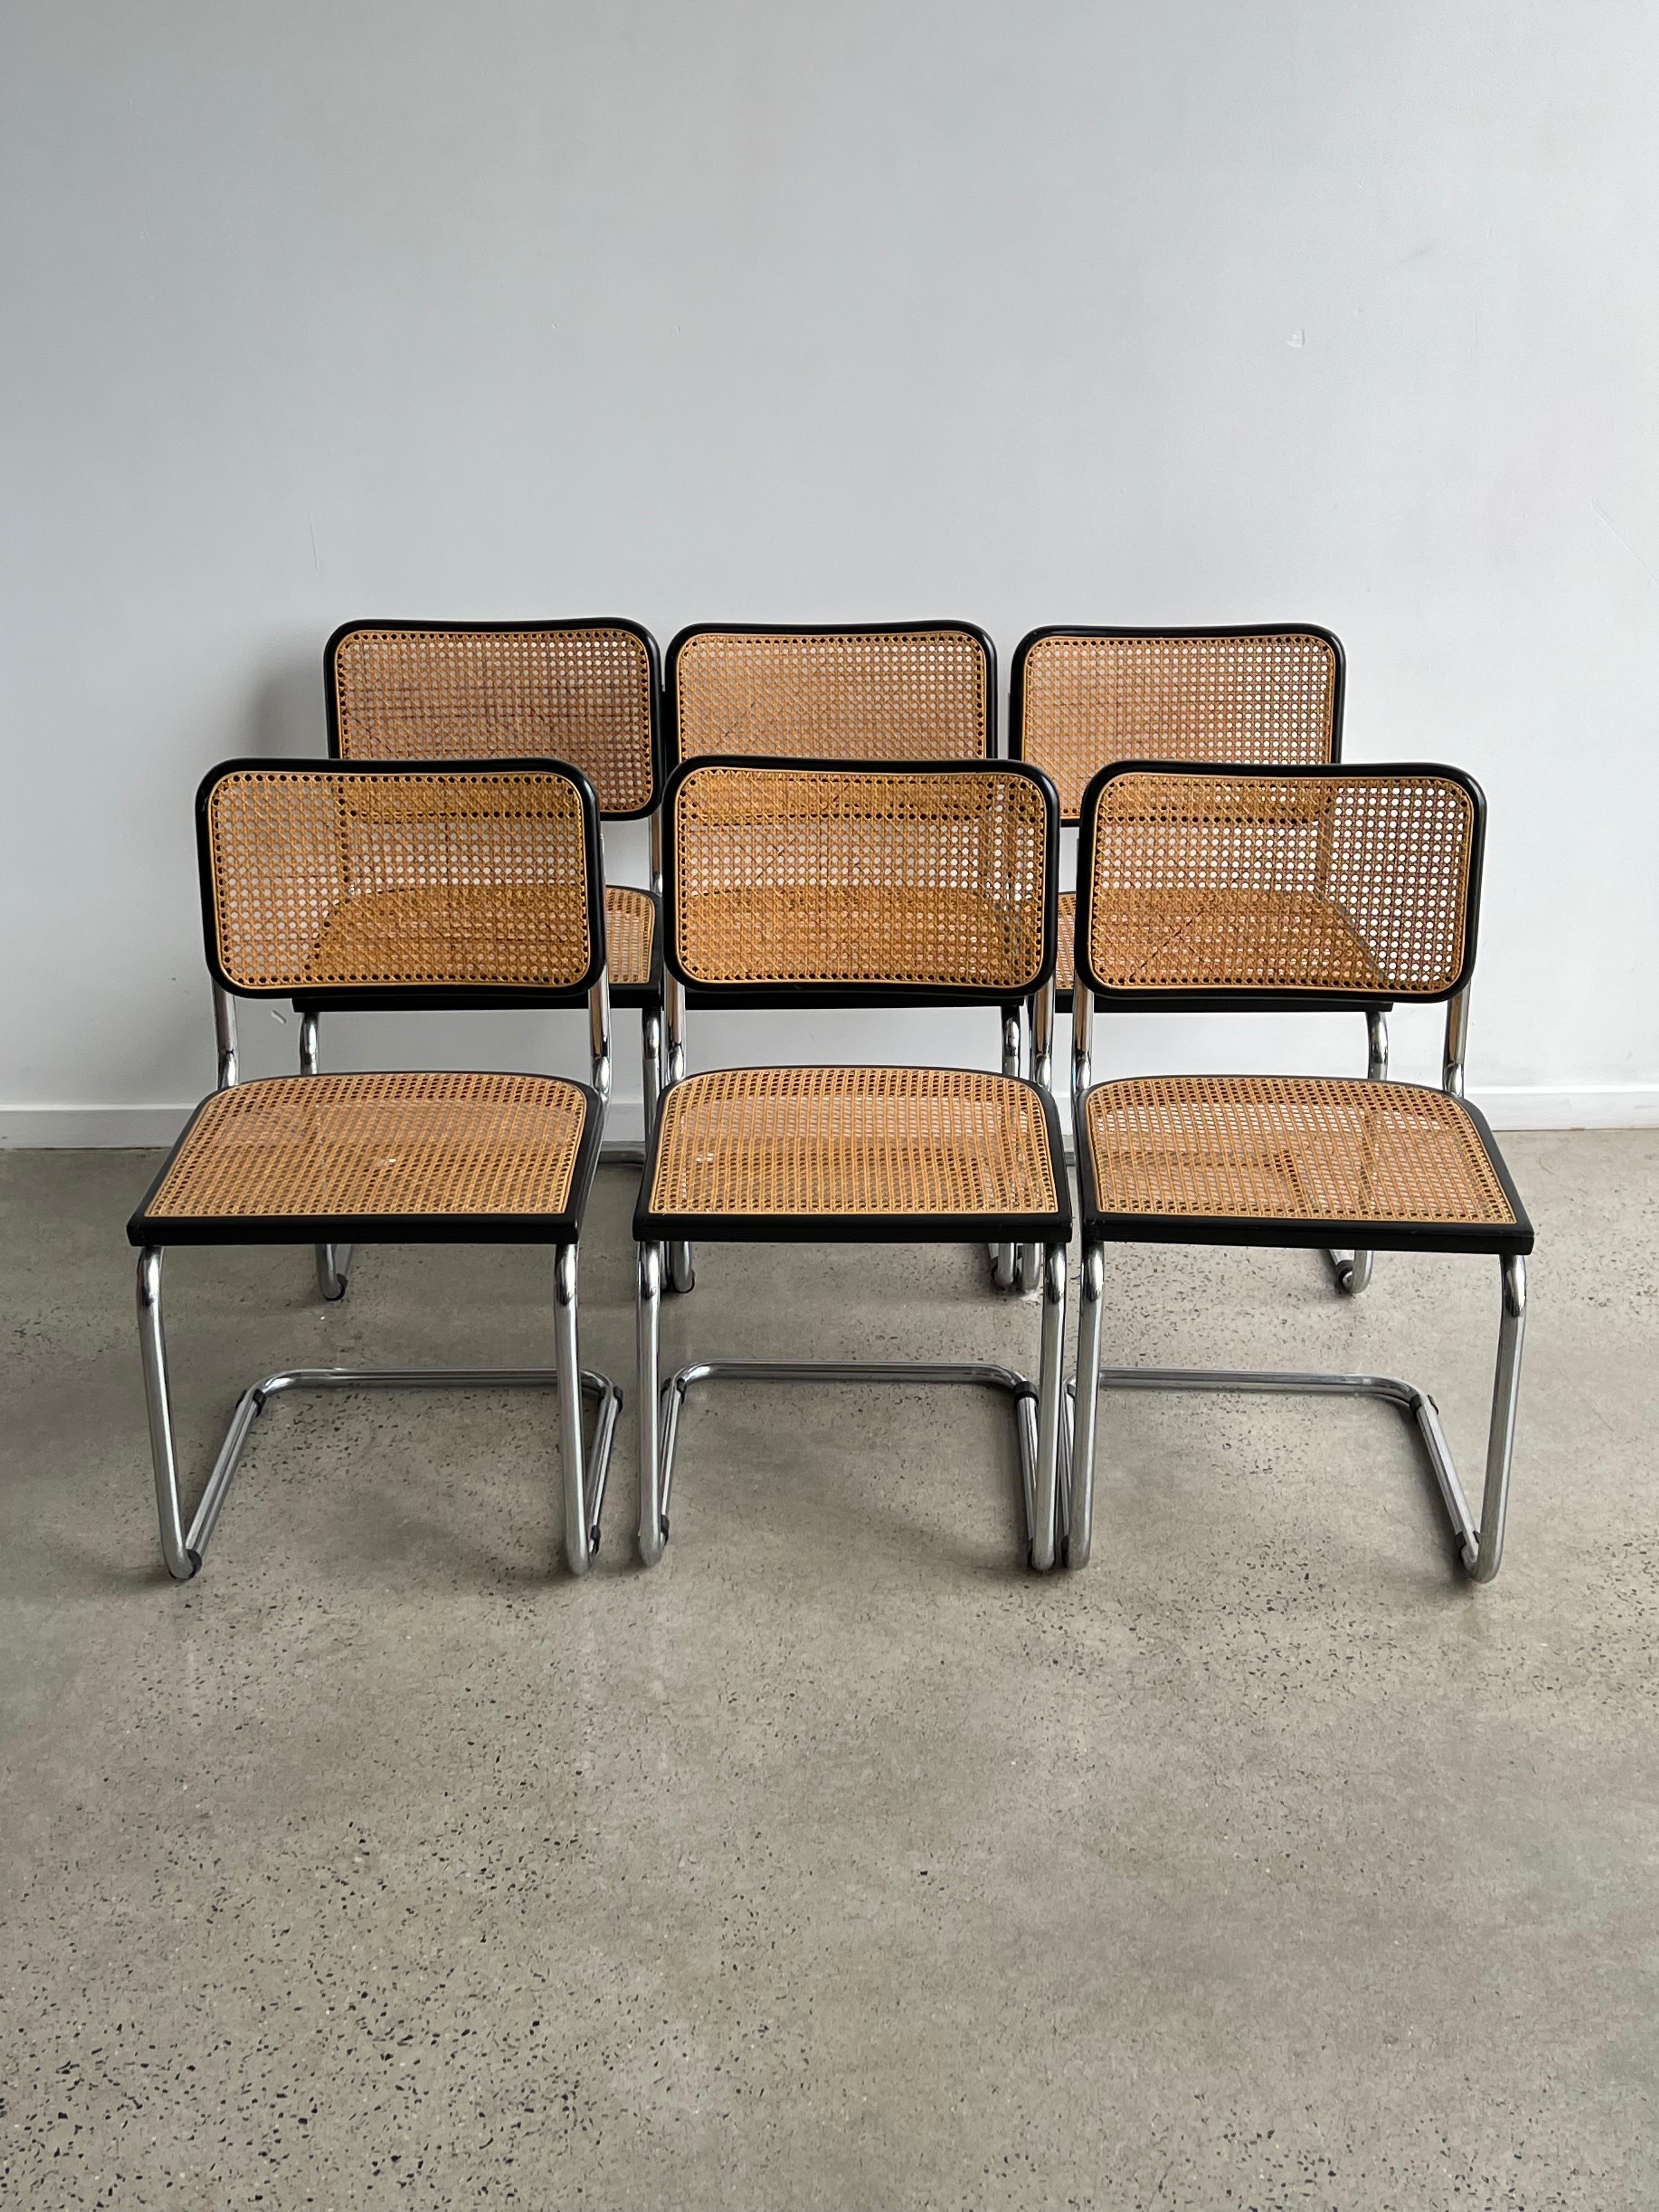 1970 chairs